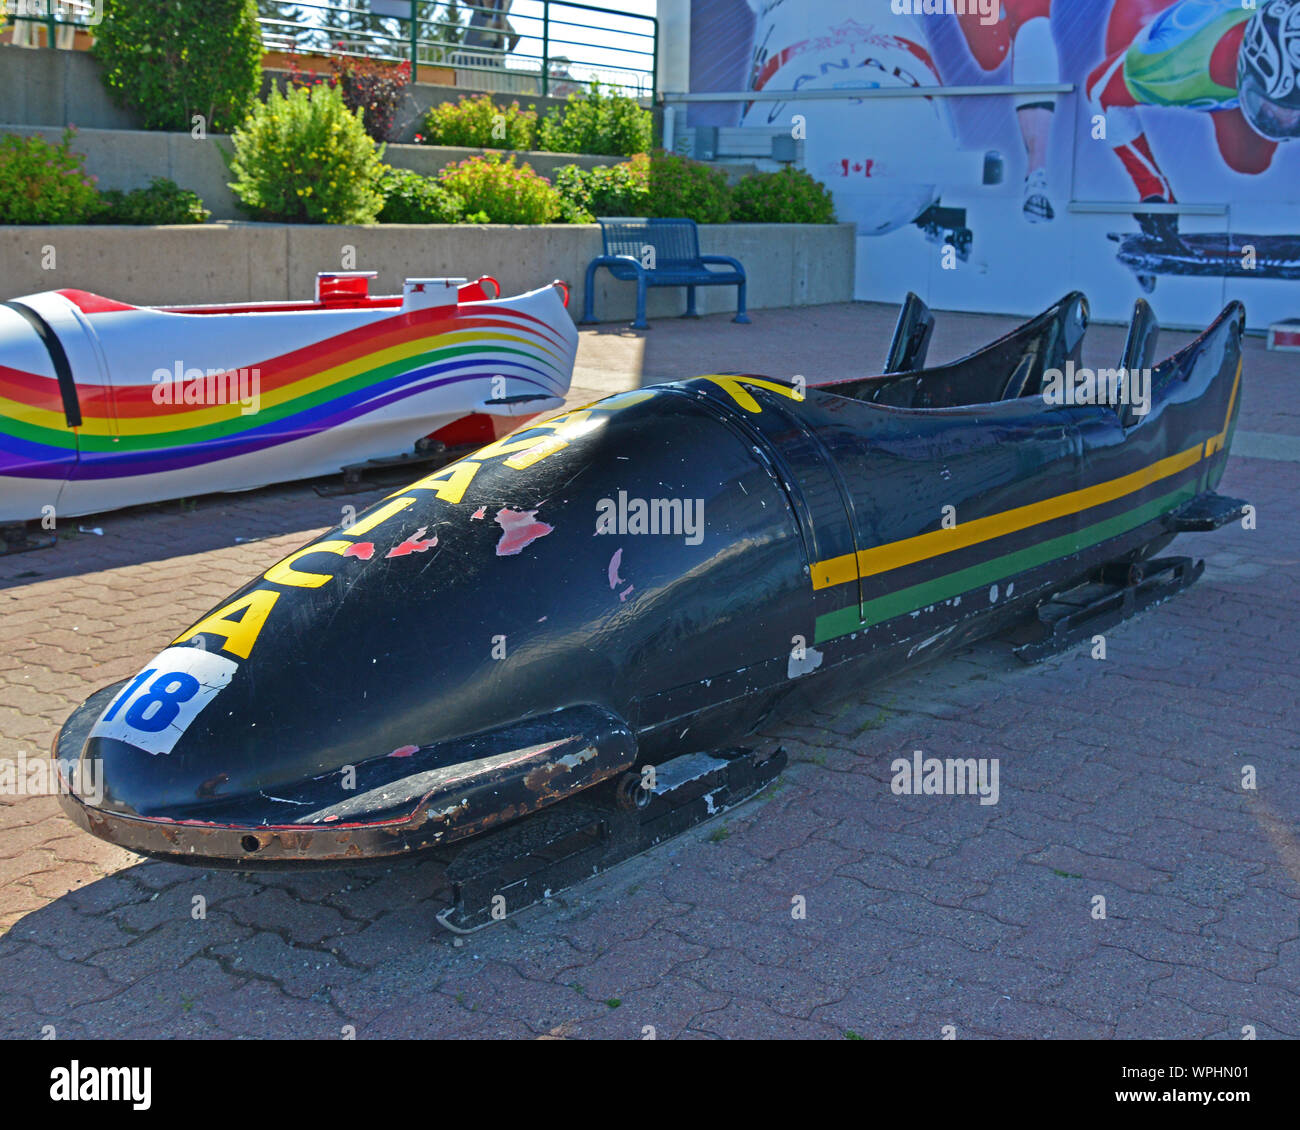 Cool Runnings High Resolution Stock Photography and Images - Alamy